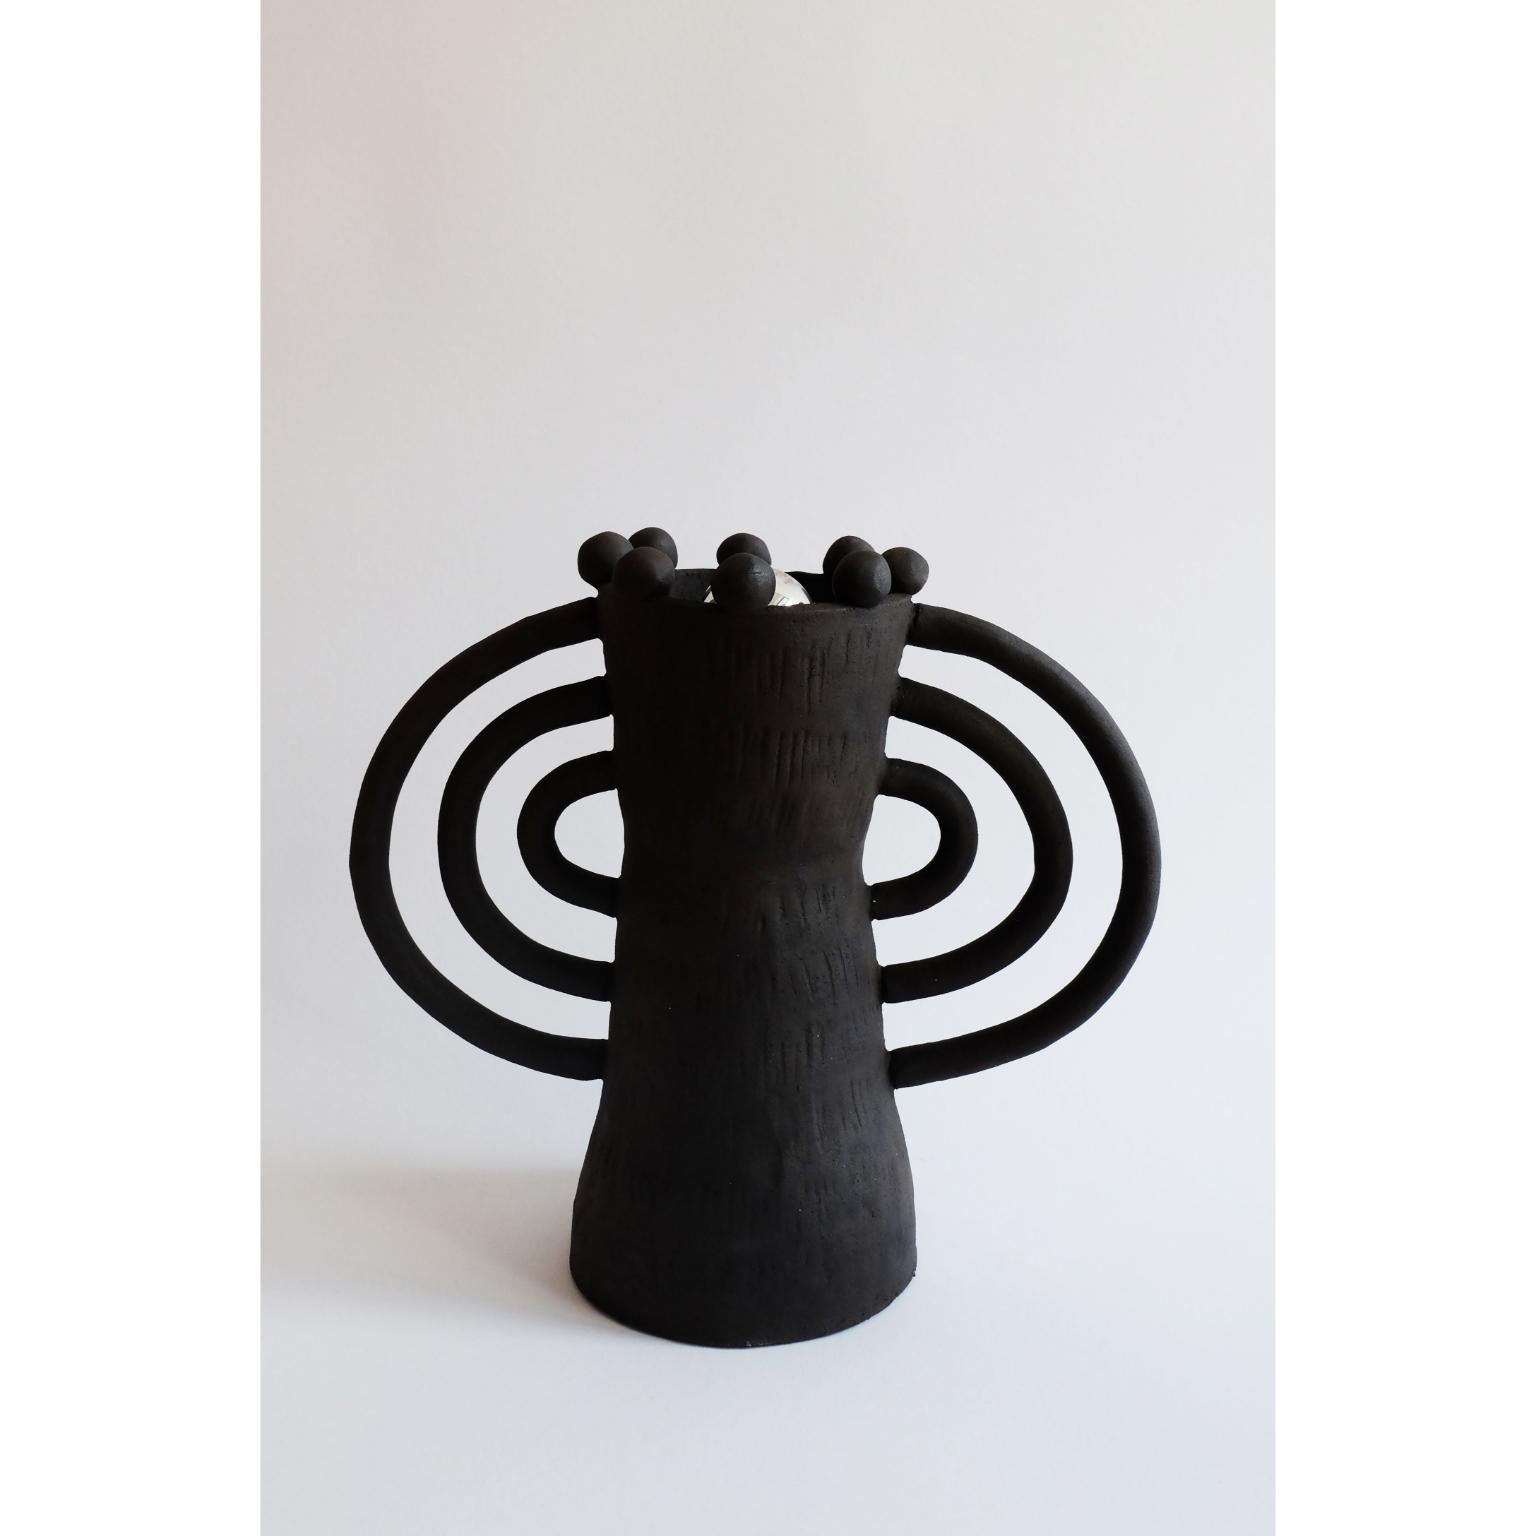 Handsculped Alcazar table lamp by Ia Kutateladze
Dimensions: W 32 x H 26 cm
Materials: Raw Black Clay
Alcazar lamp combines hand-built organic structure, with soft geometric elements and shapes, an object full of character.
IAAI / Ia Kutateladze